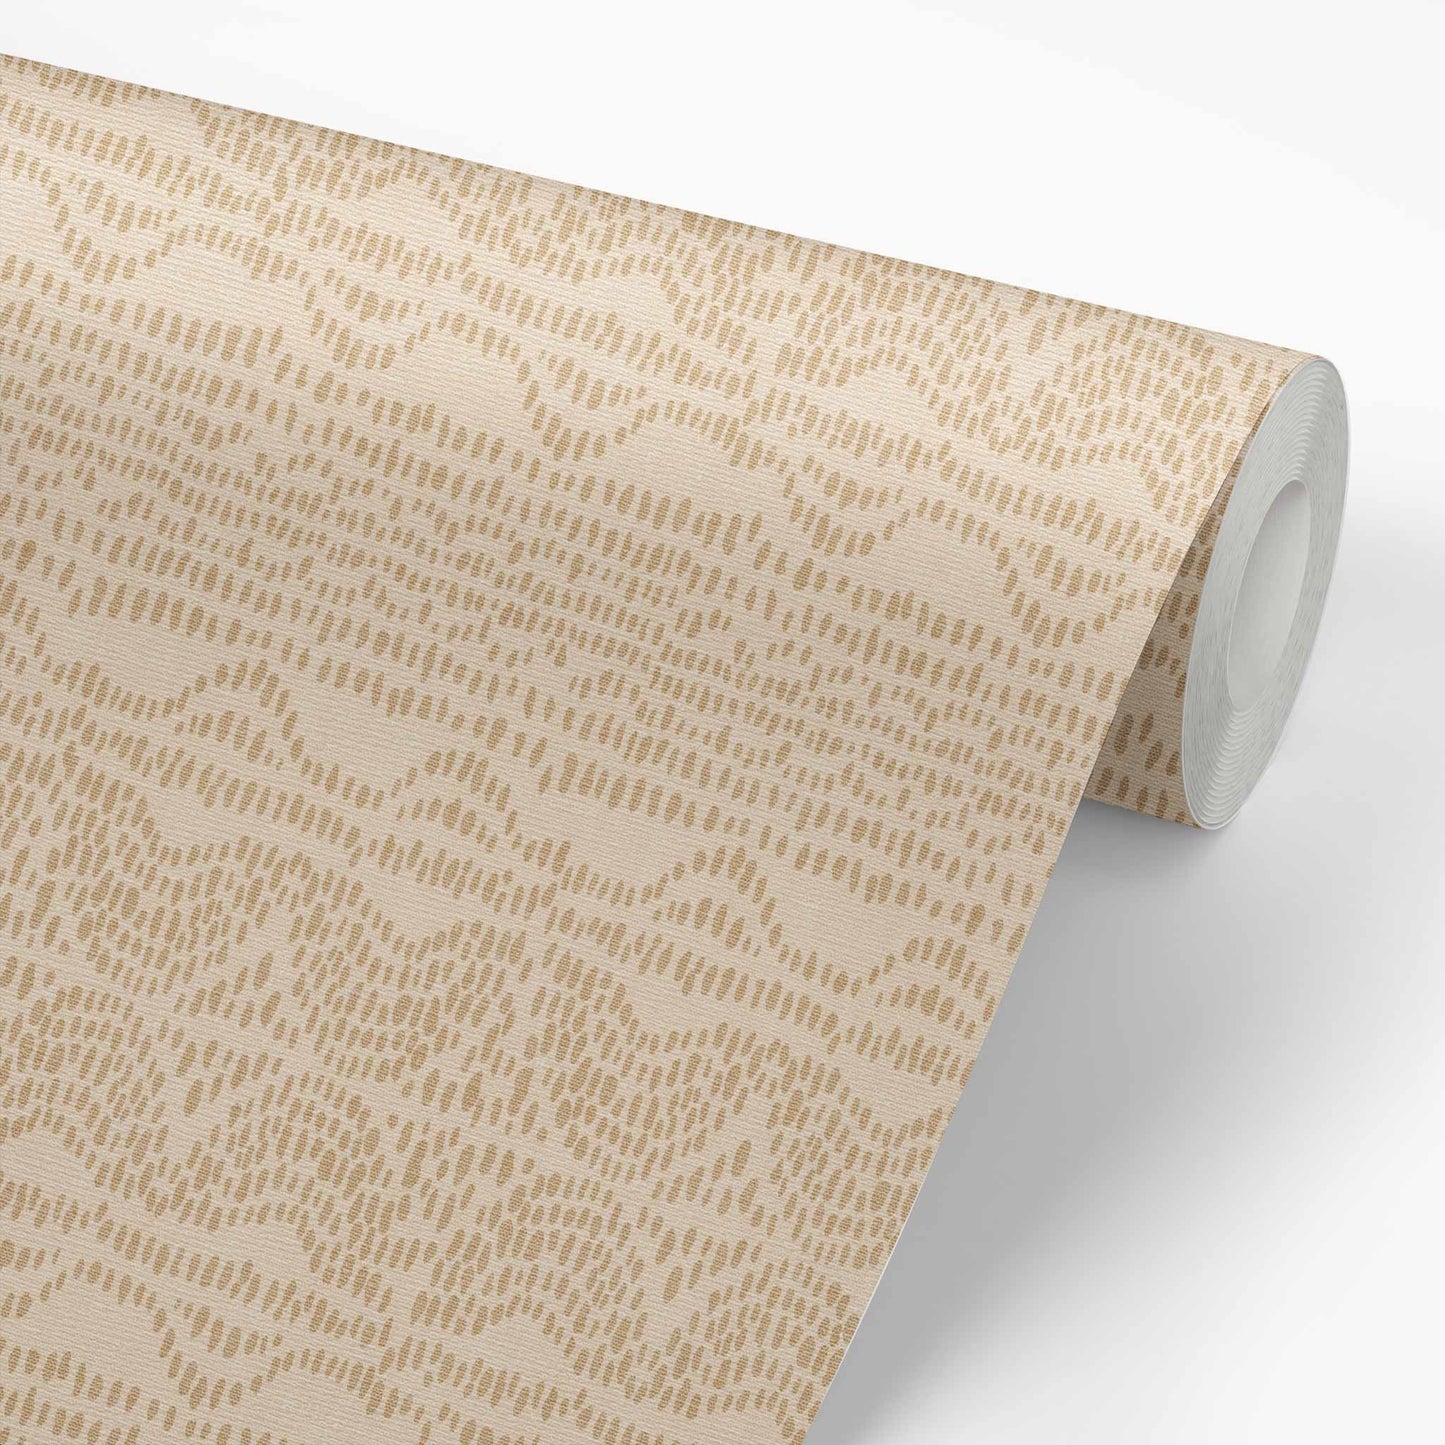 Drip with style with Sand Dripping Dots Wallpaper! Its intricate, geometric design will add a touch of sophistication to any room, with no mess! Whether you're using it to spruce up a bathroom or office, Dripping Dots is the perfect way to give any space a modern makeover. 